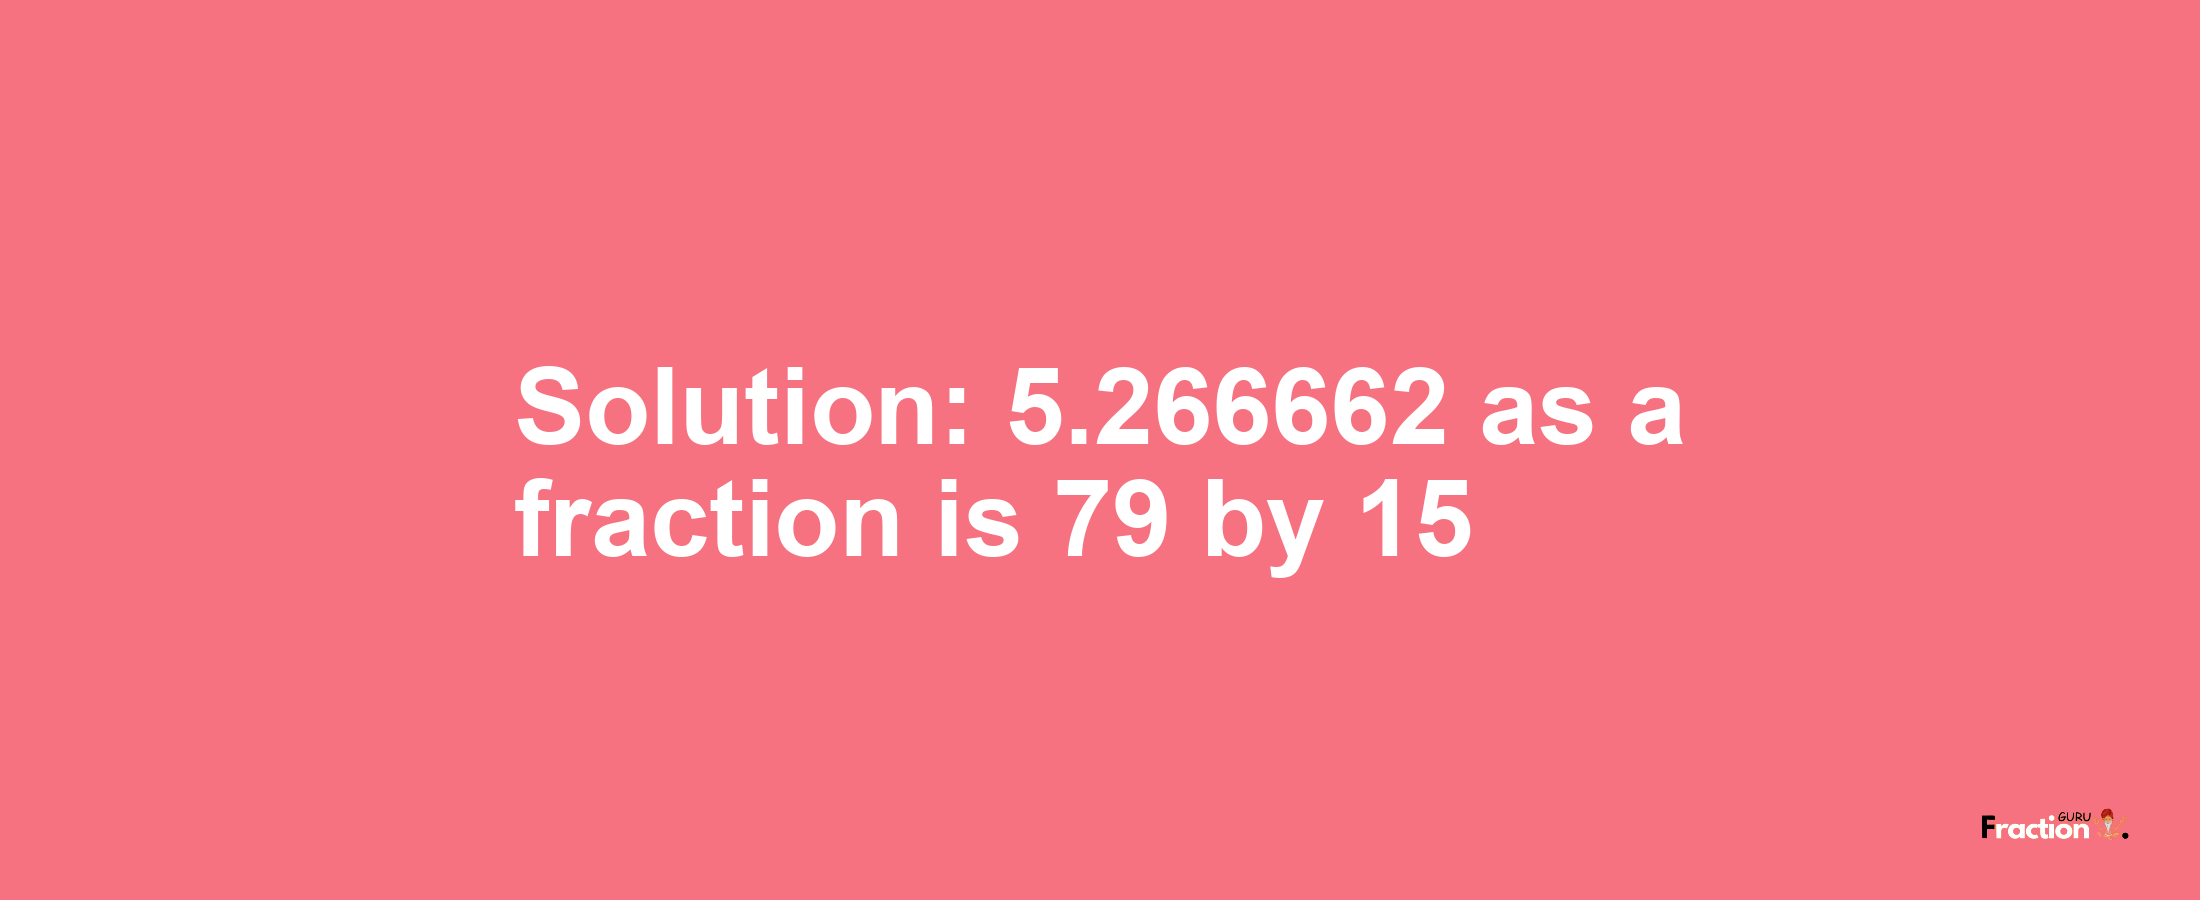 Solution:5.266662 as a fraction is 79/15